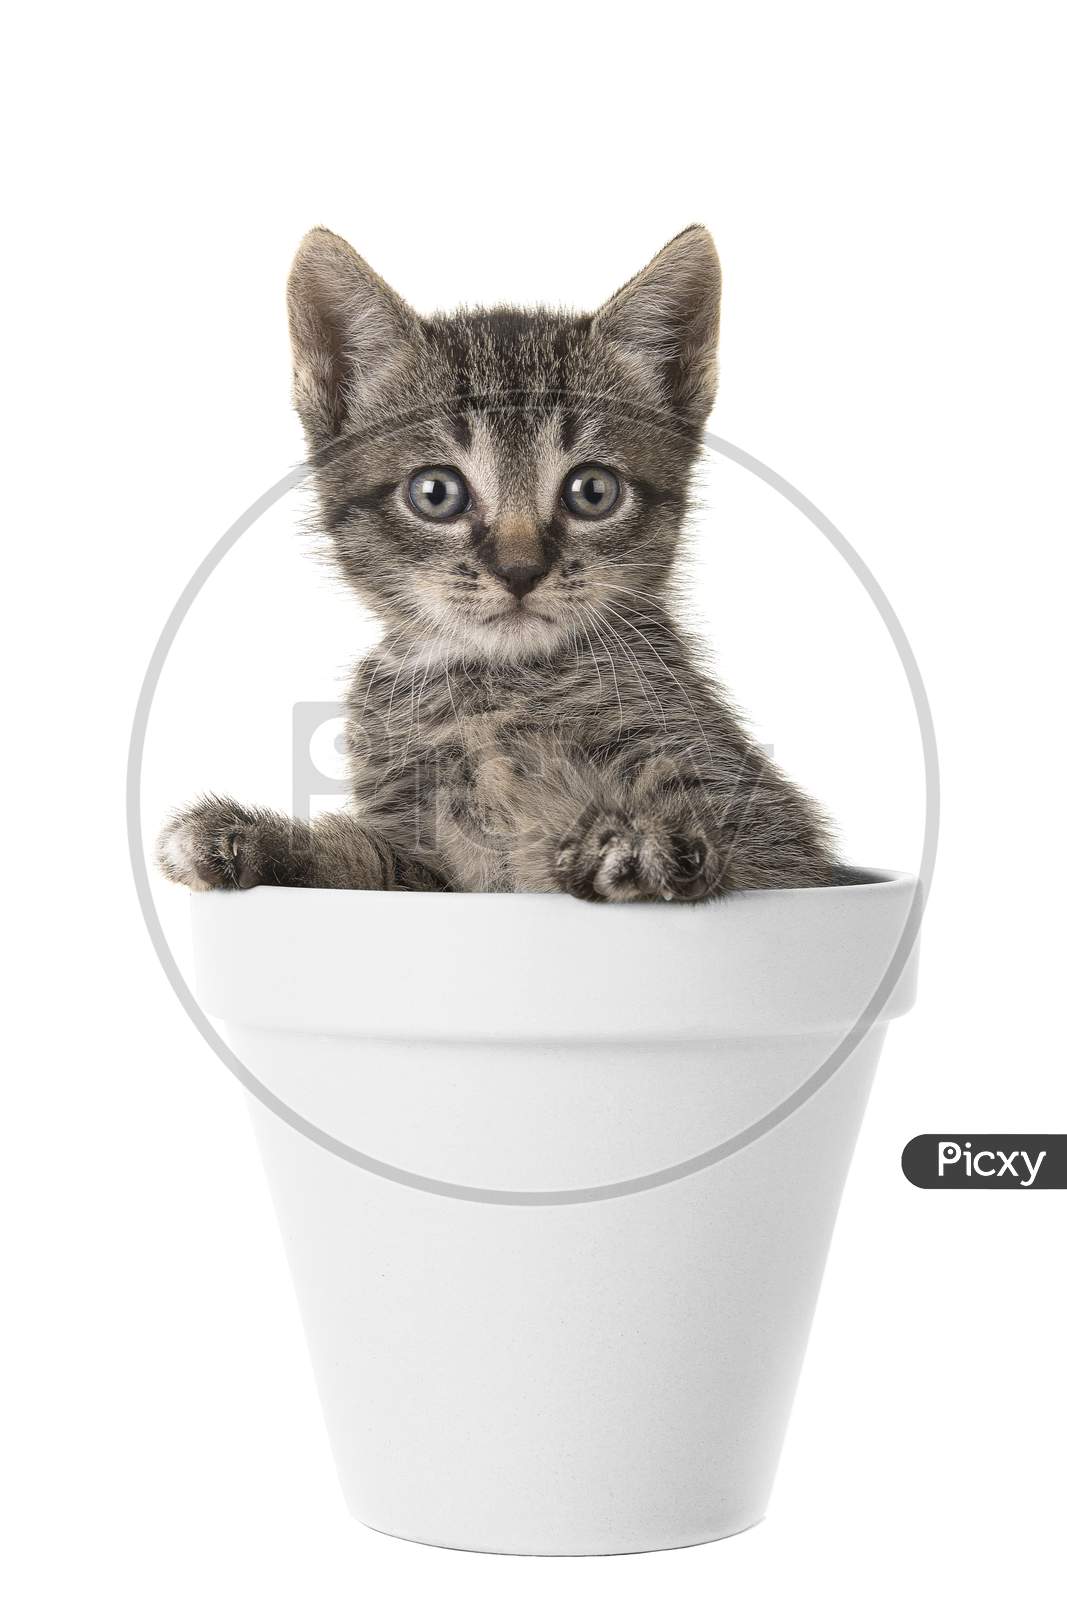 Cute Tabby Baby Kitten In A White Flower Pot Looking At The Camera Isolated On A White Background